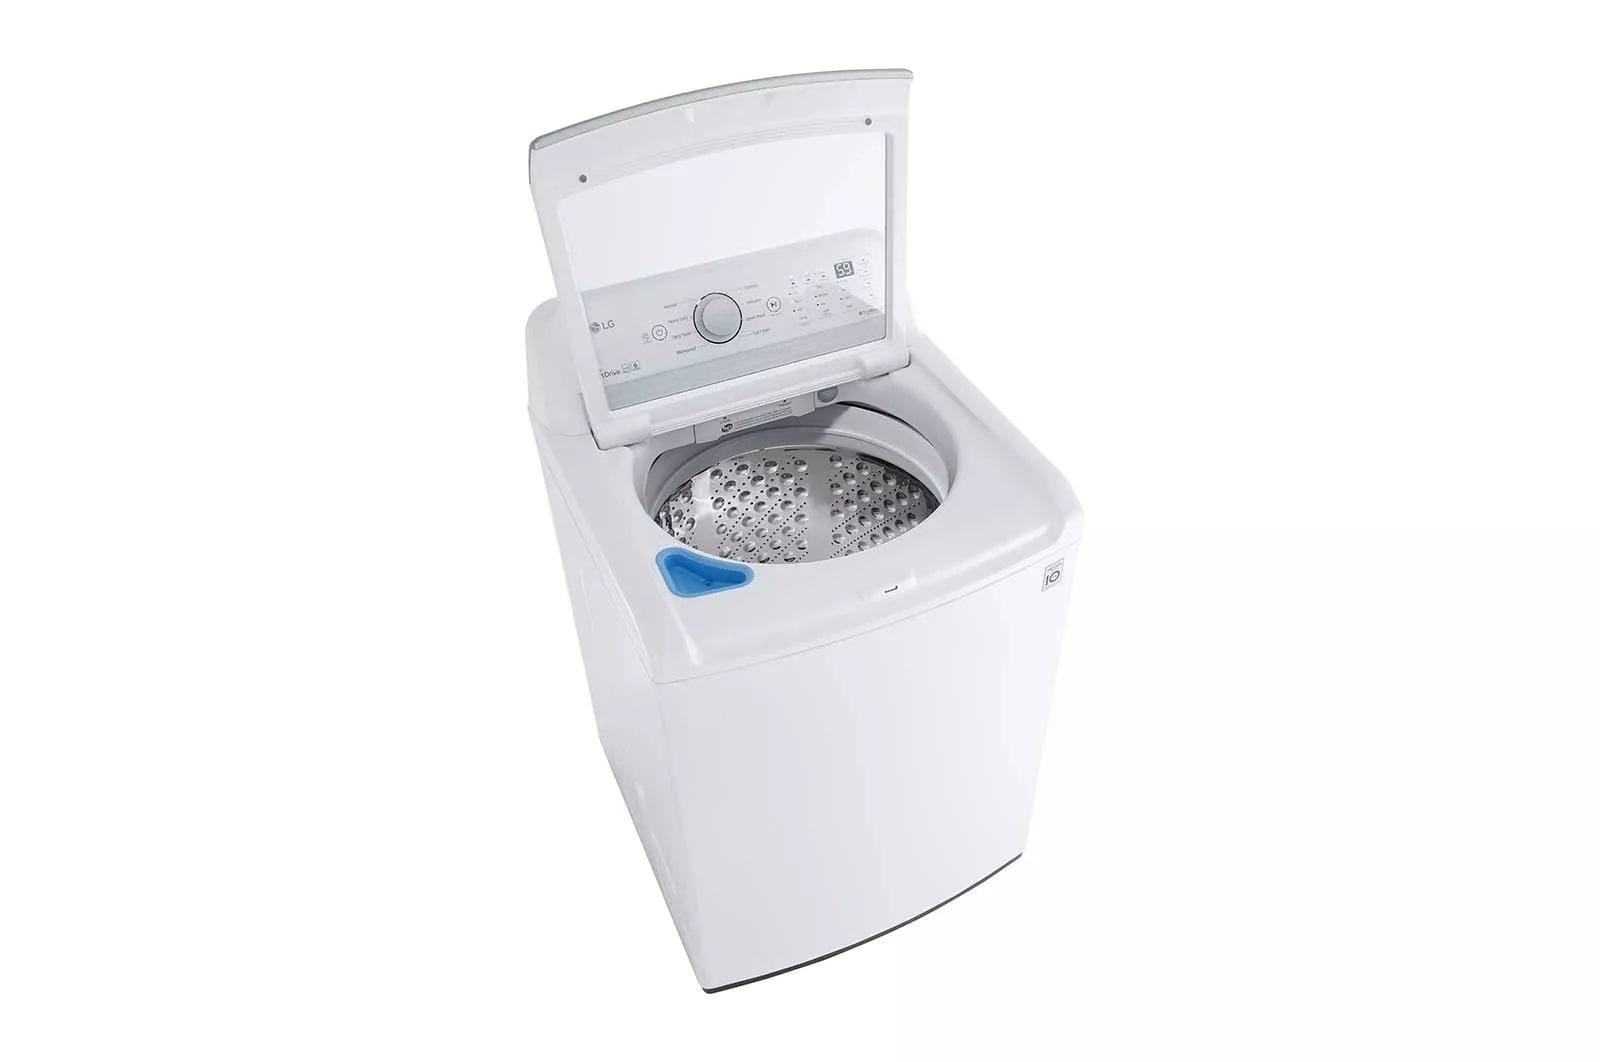 Lg Wt7150c 27" Wide 5 Cu. Ft. Energy Star Certified Top Loading Washing Machine - White - image 3 of 5